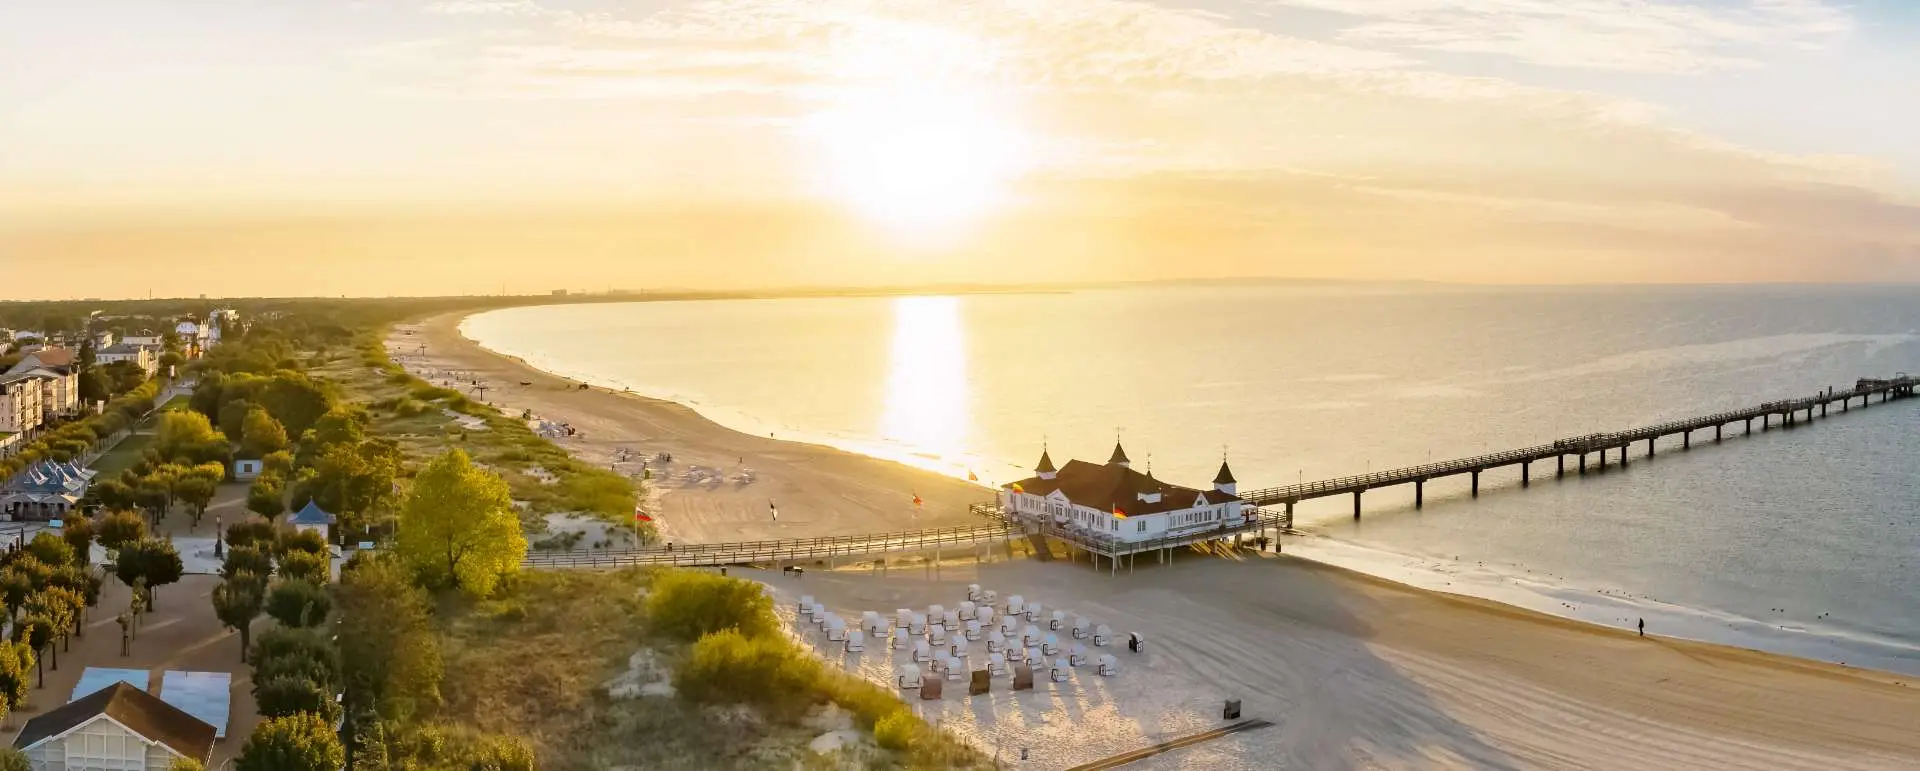 Usedom - the destination with large hotels